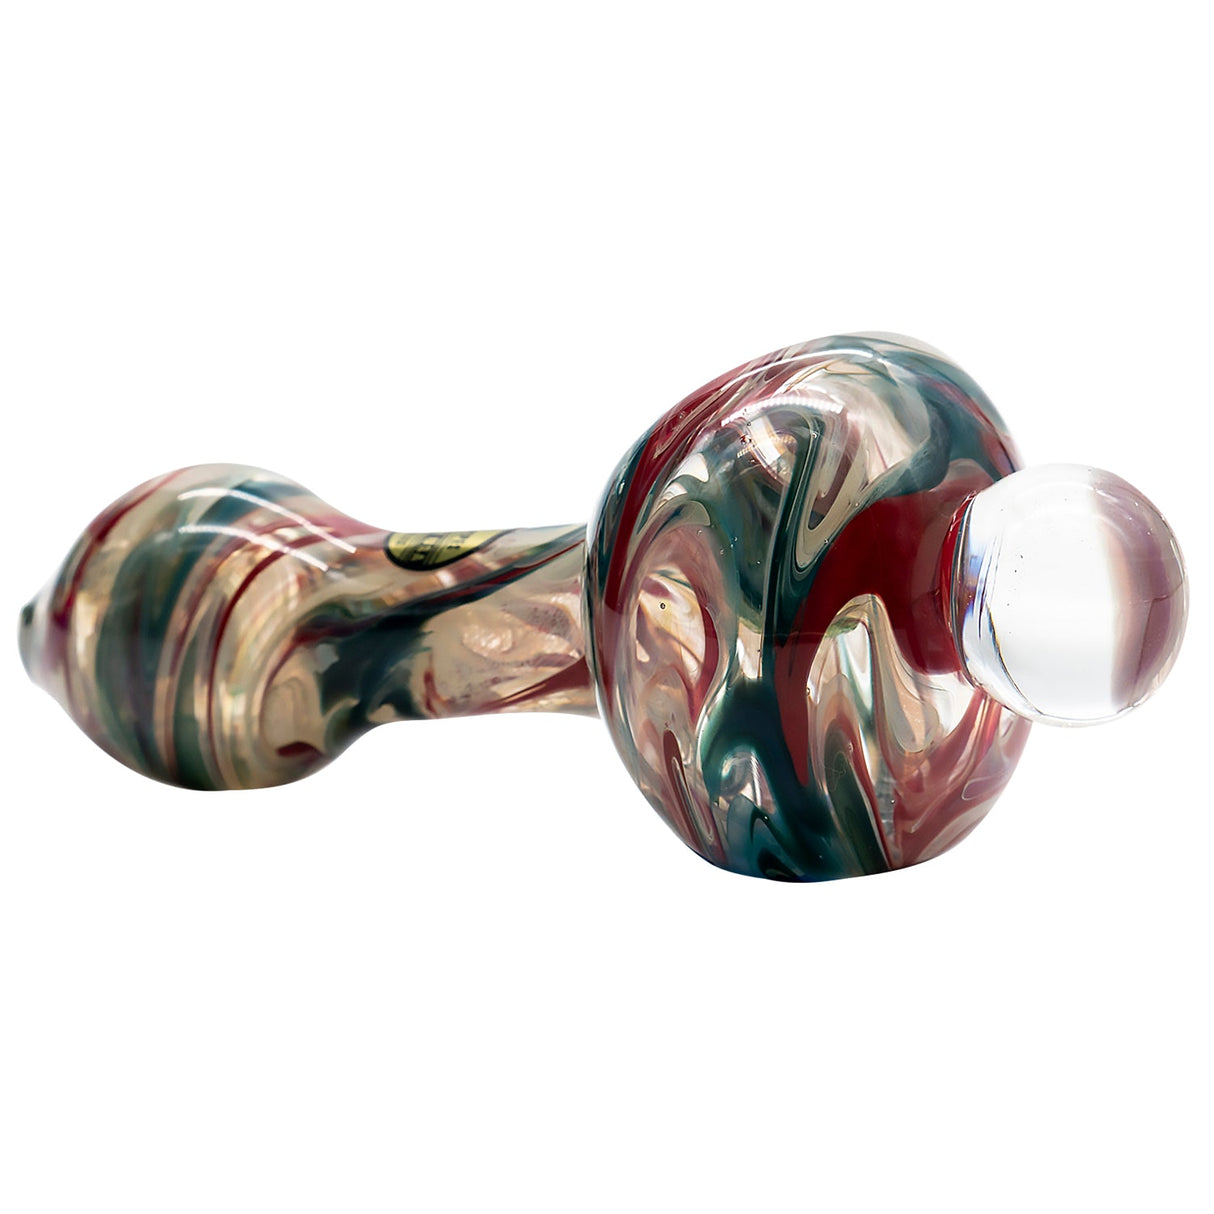 LA Pipes "Primordial Ooze" Glass Spoon Pipe, Fumed Color Changing, 4.5" Length, Side View